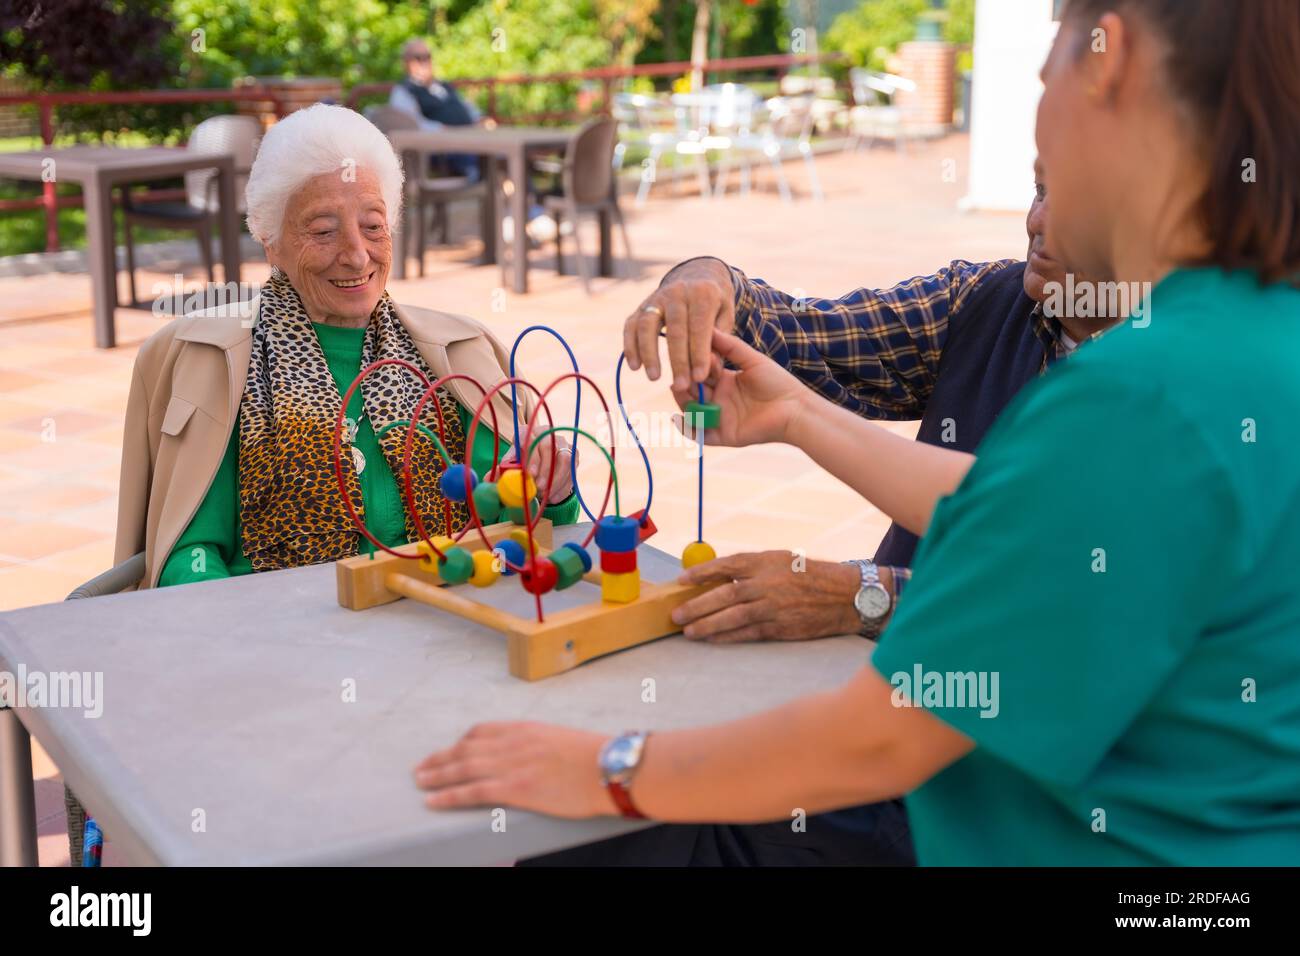 Two elderly people in the garden of a nursing home or retirement home playing with games to improve mobility Stock Photo